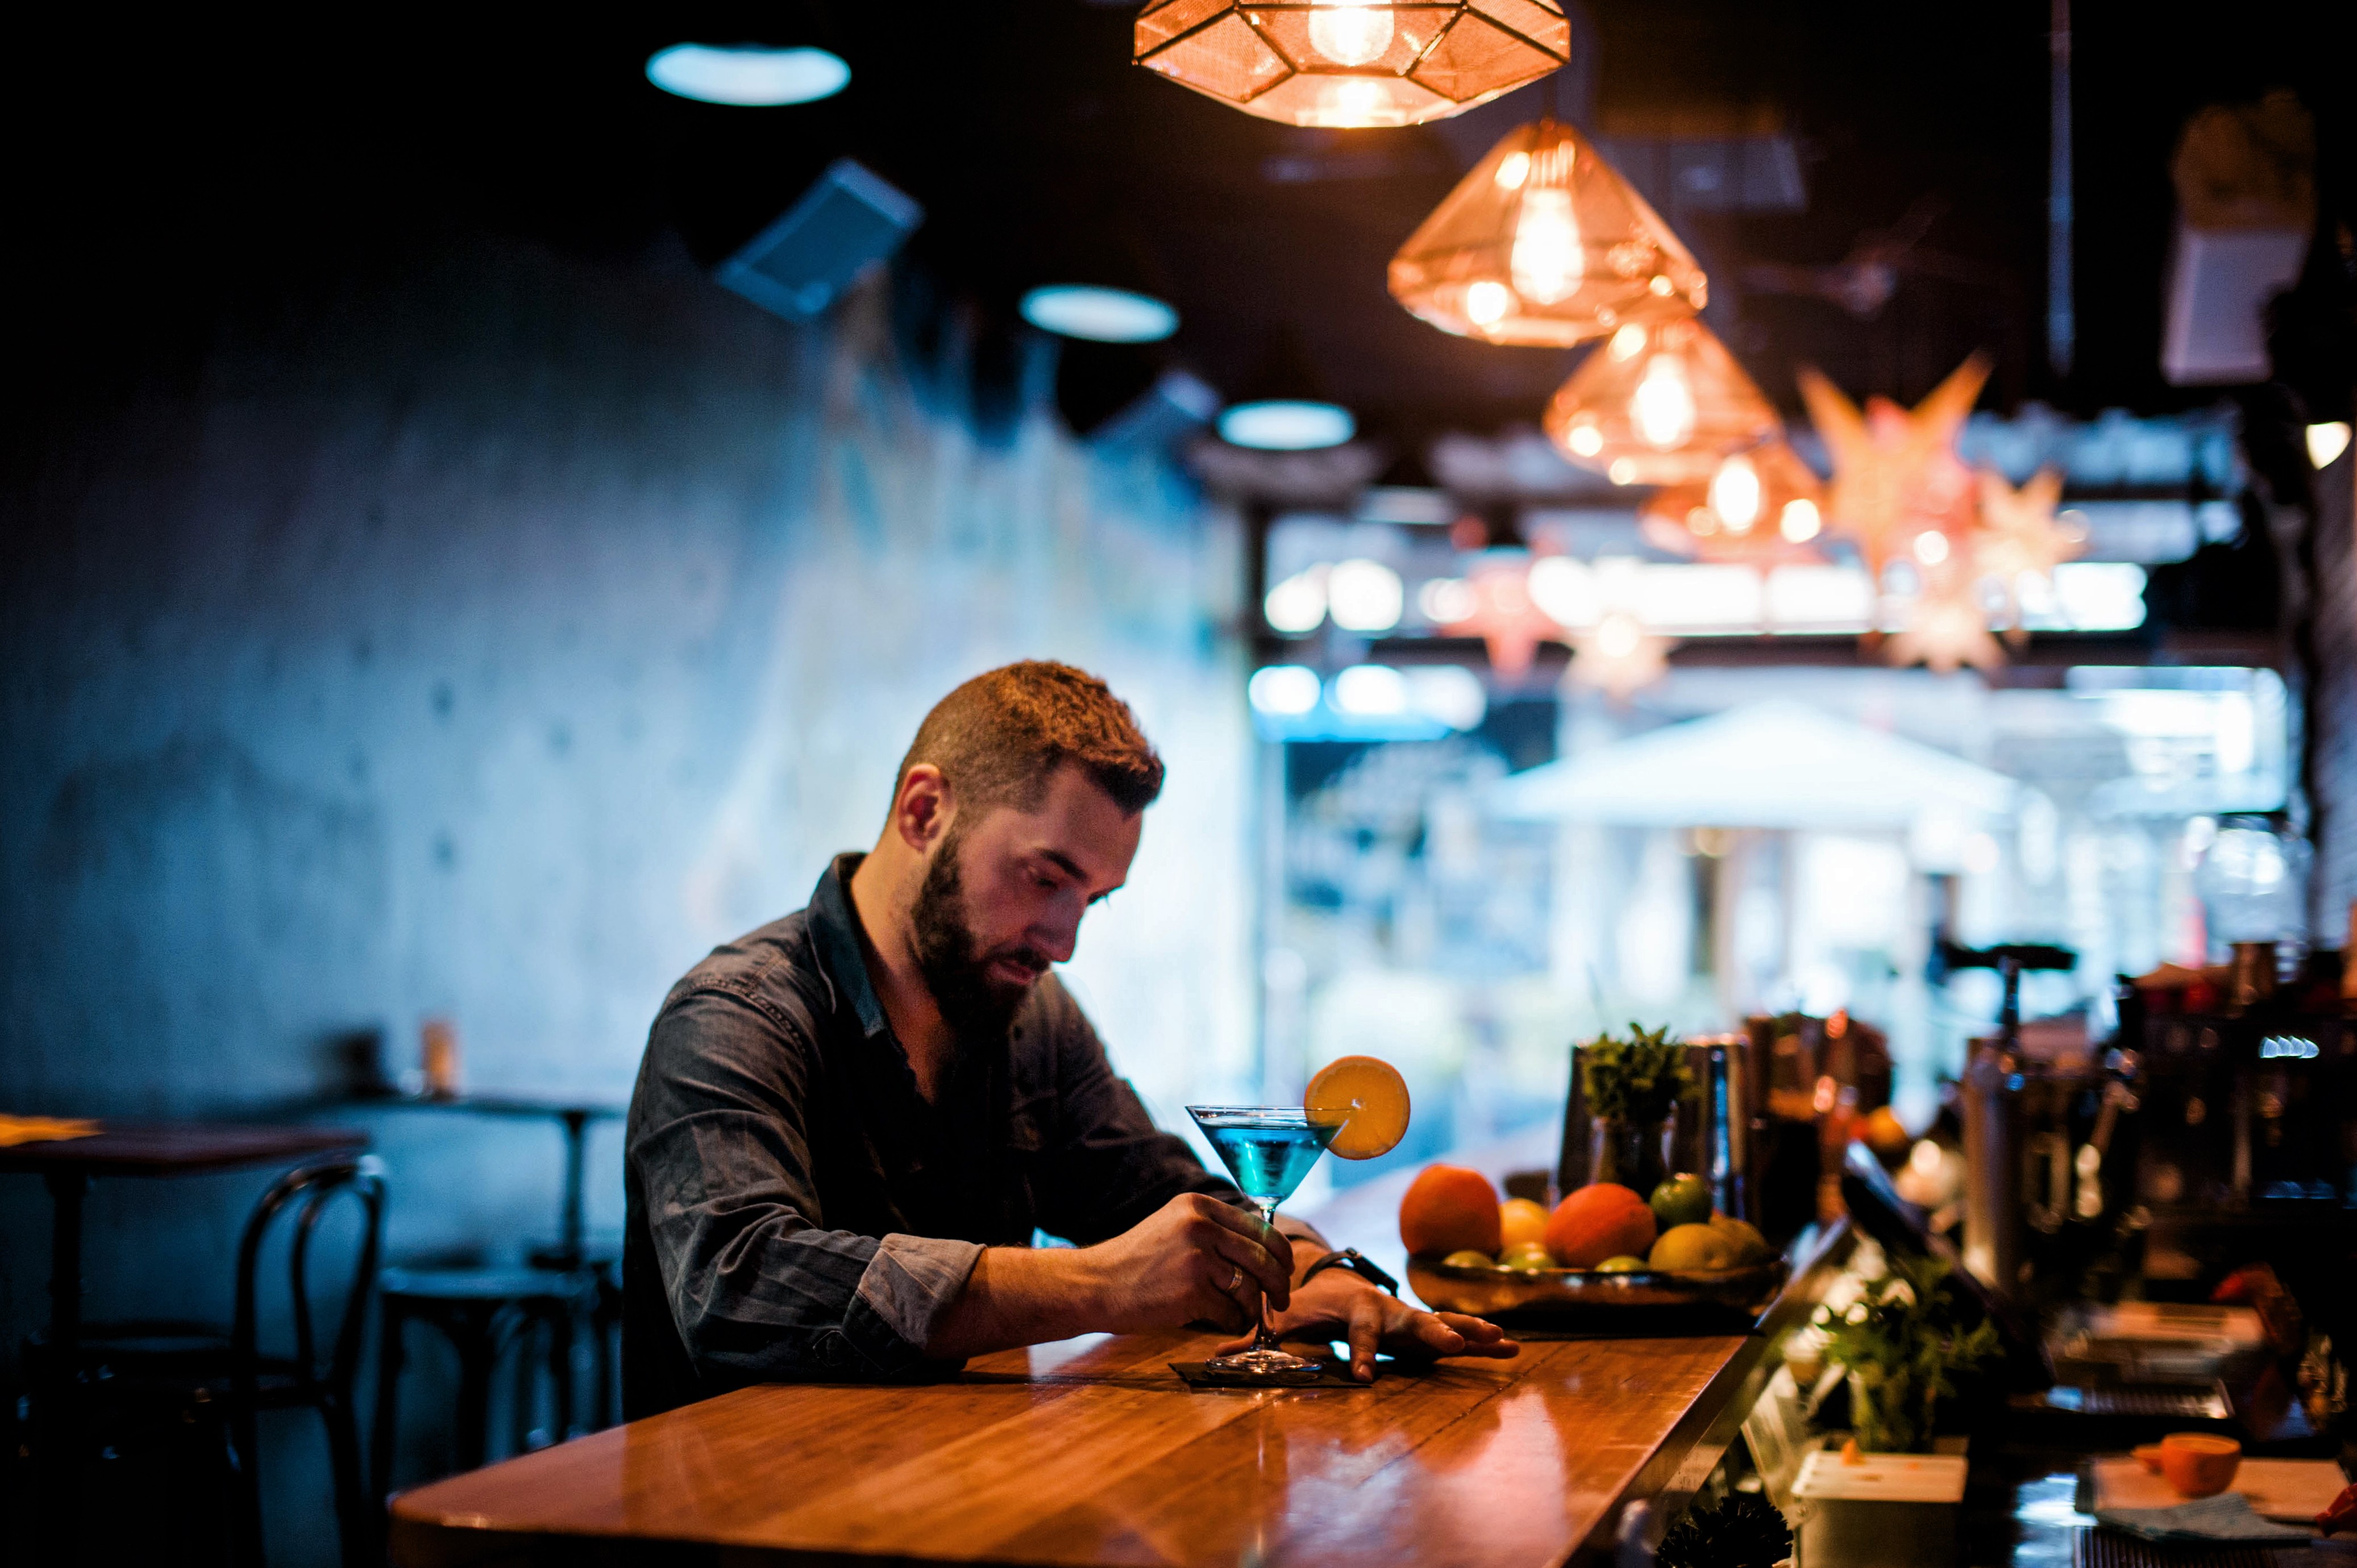 Beirut Bunker Bar: The 'friendliest bar in Canberra' churning out incredible cocktails